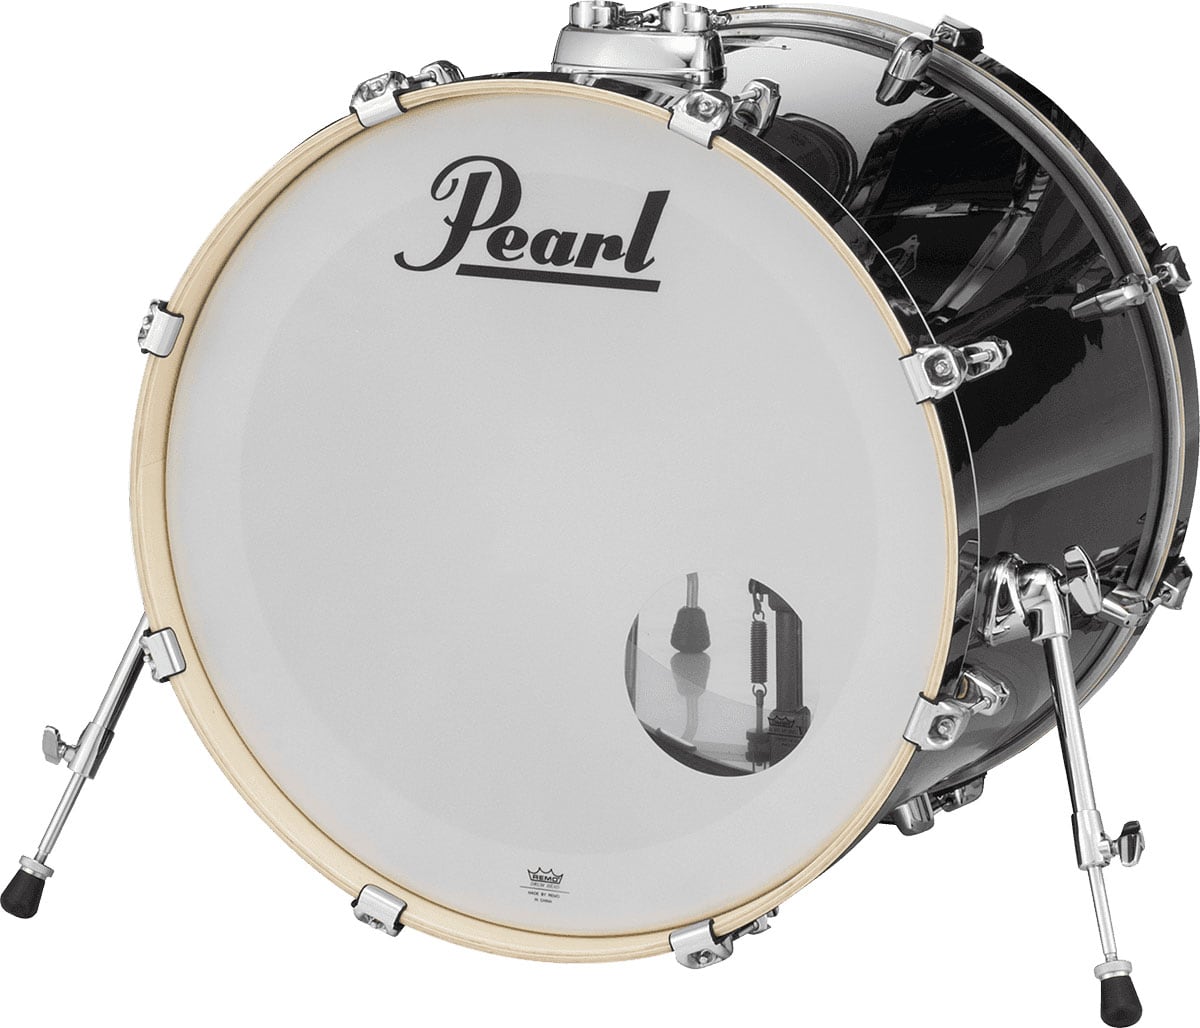 PEARL DRUMS EXX2016BC-31 - EXPORT GROSSE CAISSE 20X16